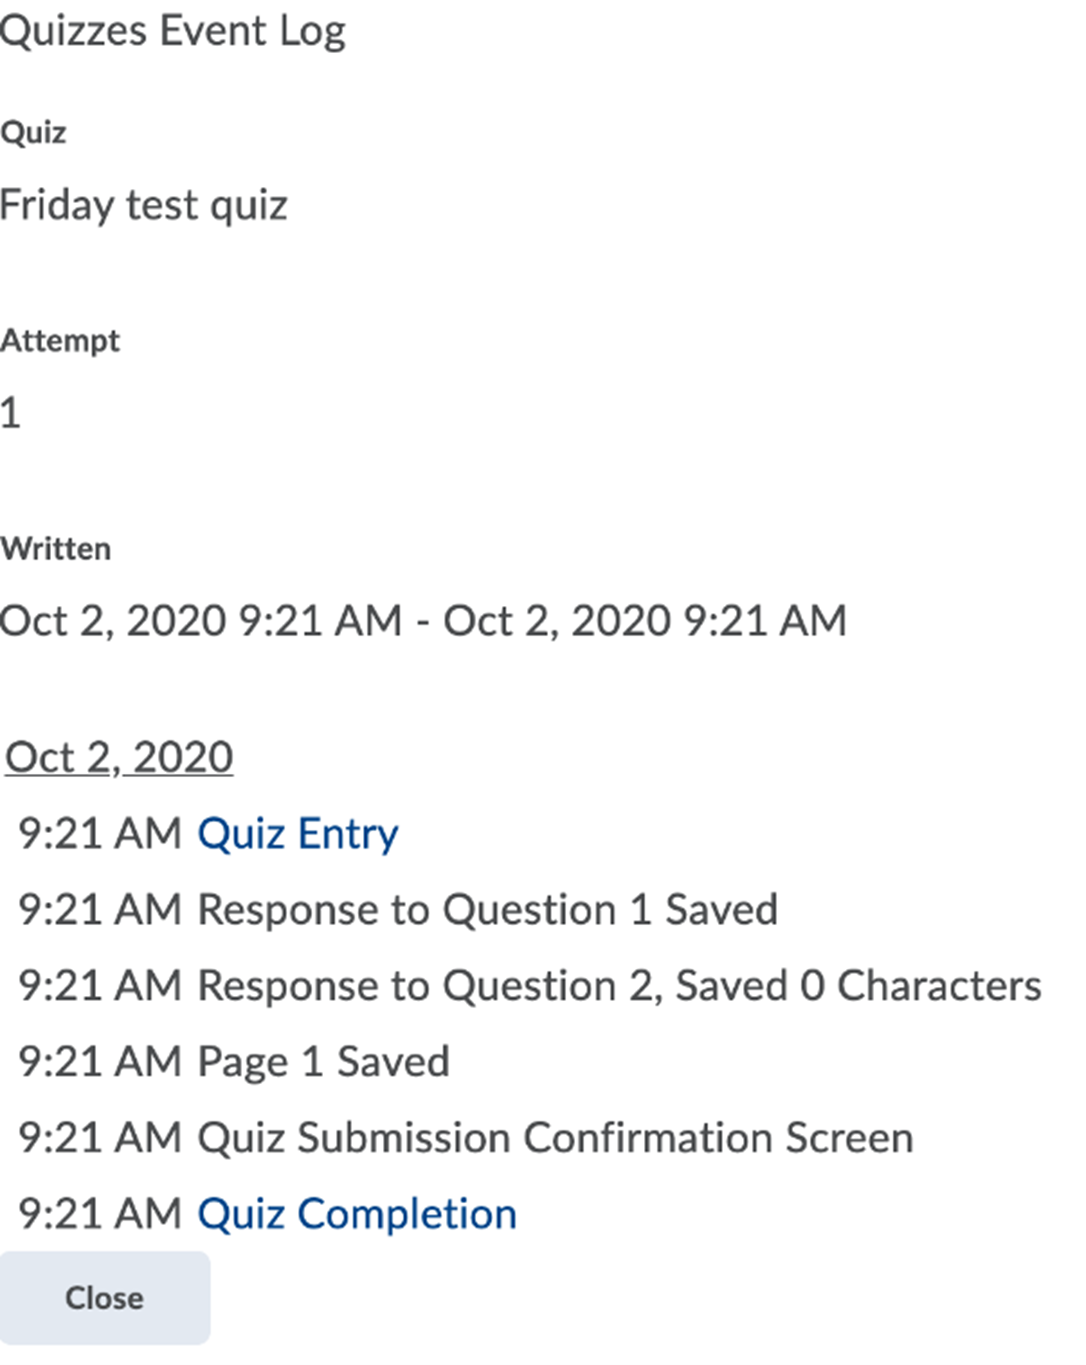 Quiz event logs include quiz entry, when responses to questions were saved, and when the quiz was completed.